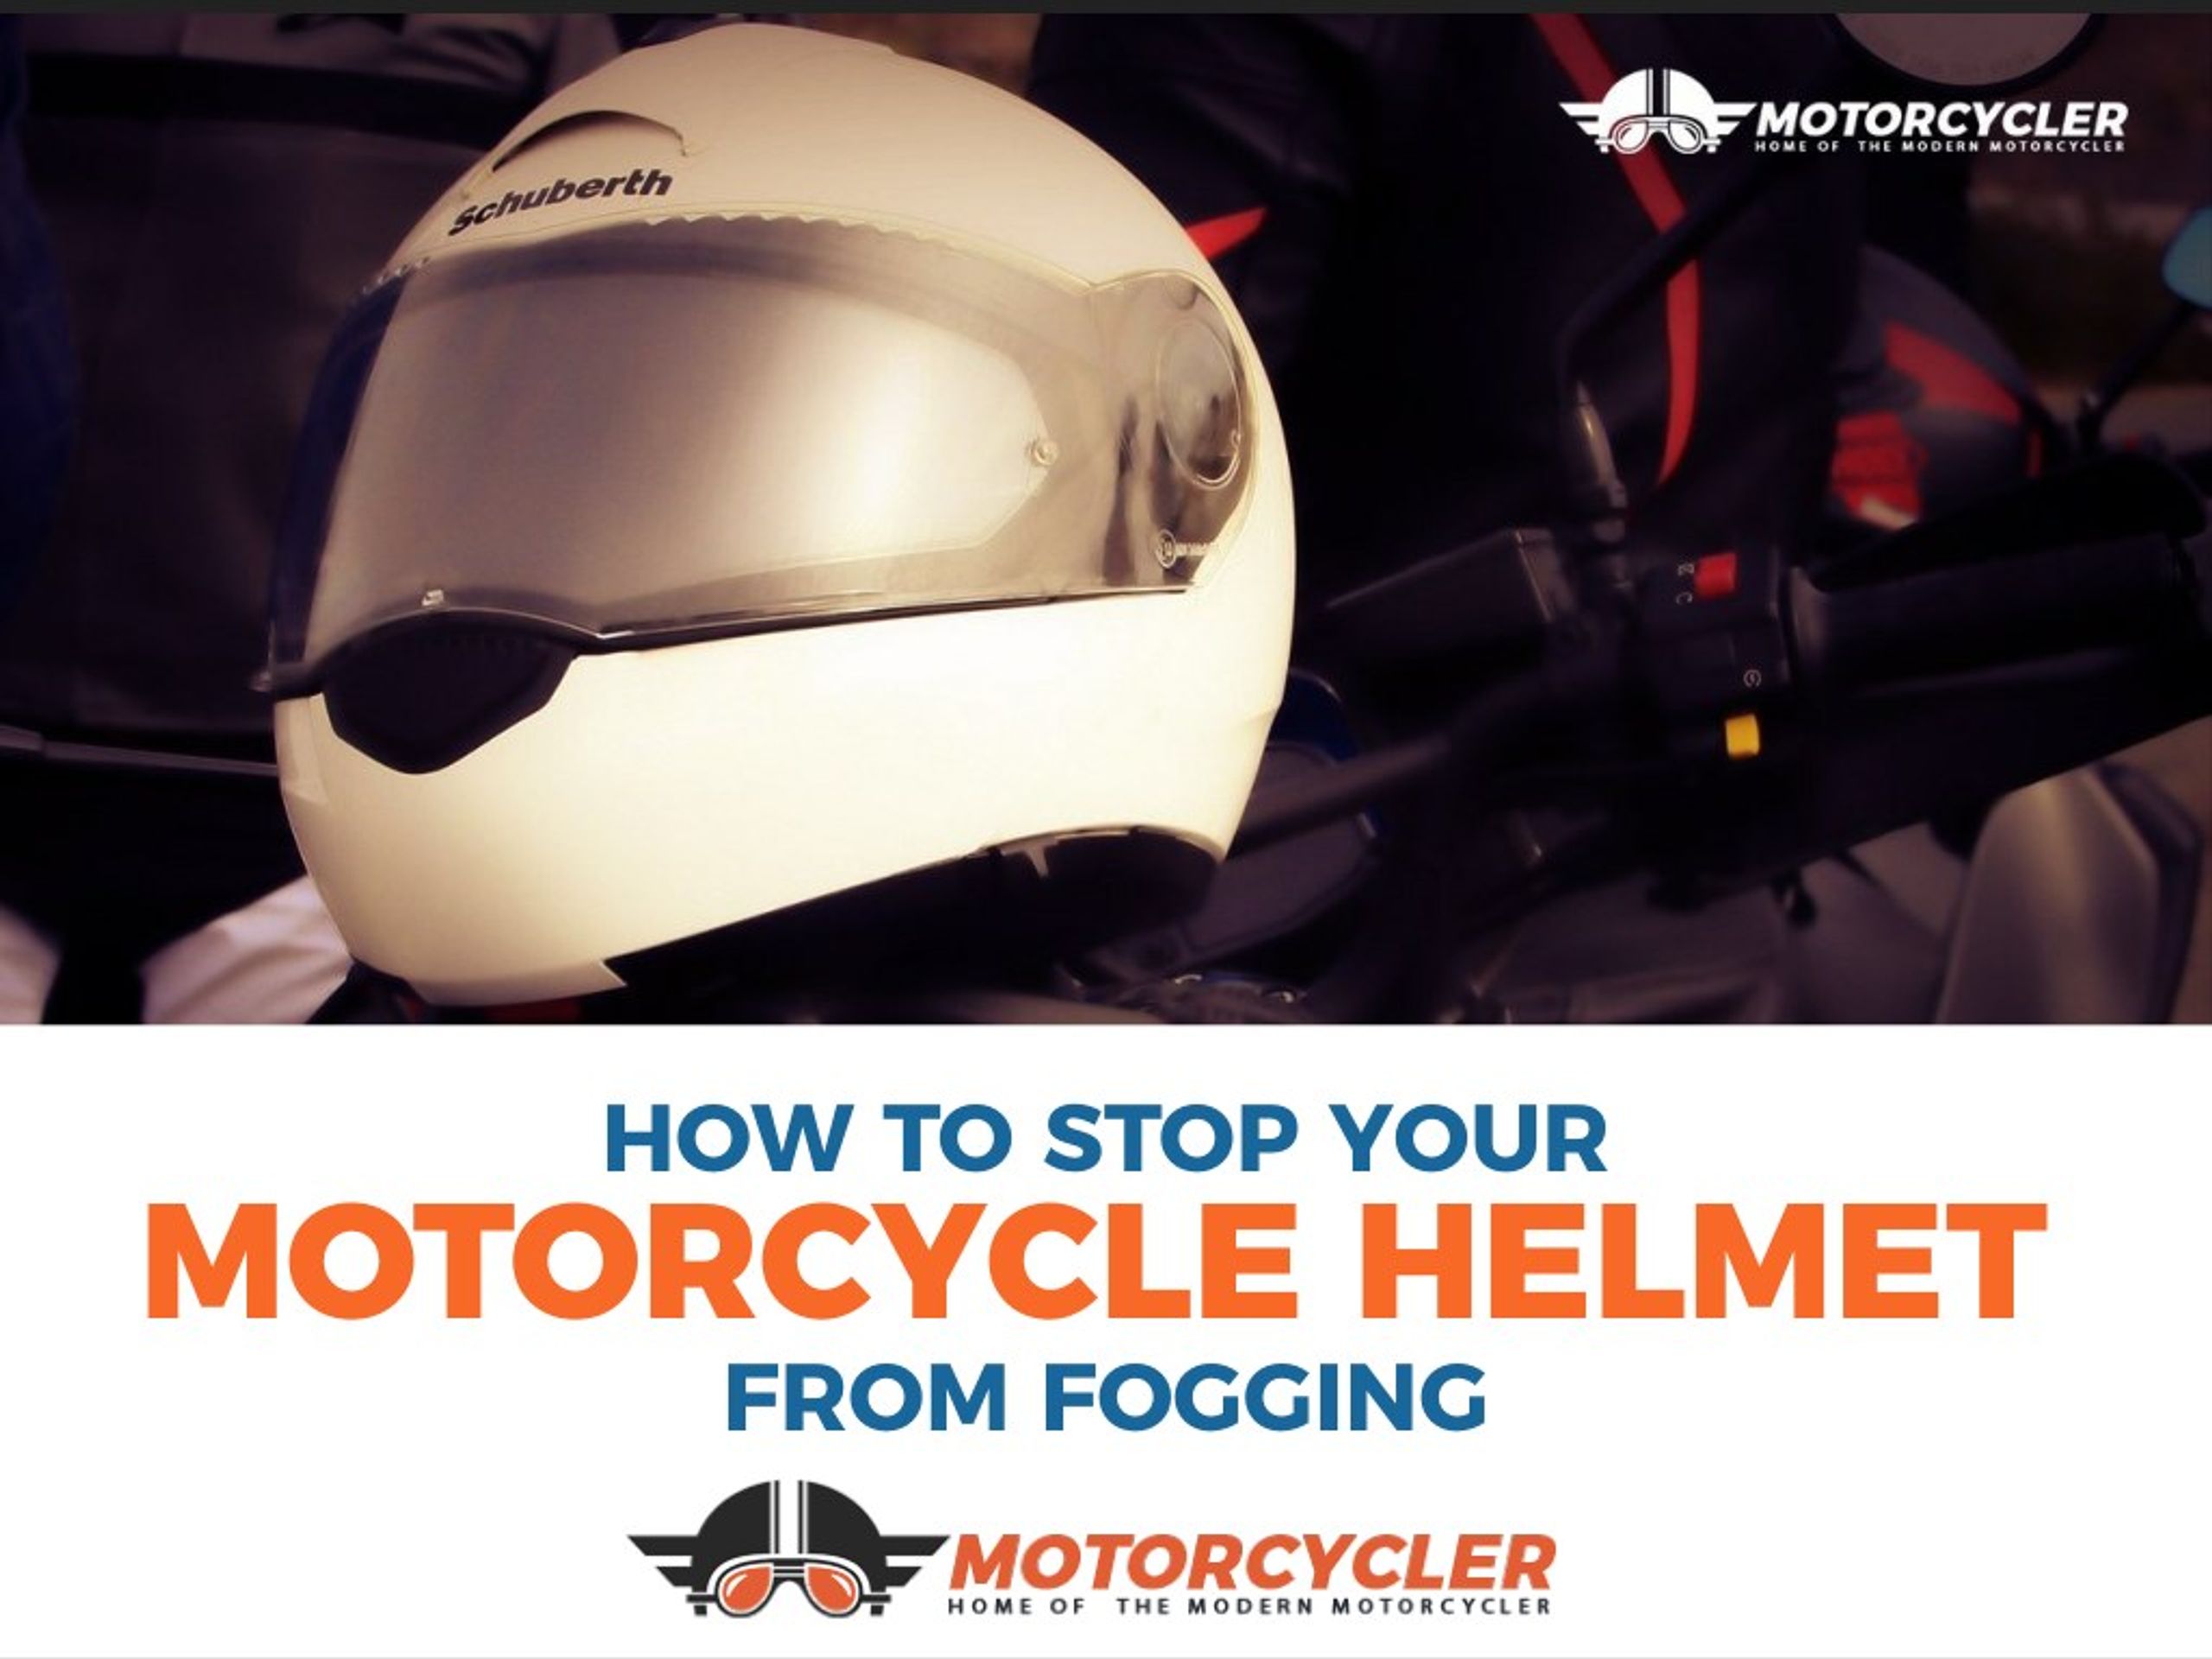 PPT - How to stop your motorcycle helmet from fogging PowerPoint